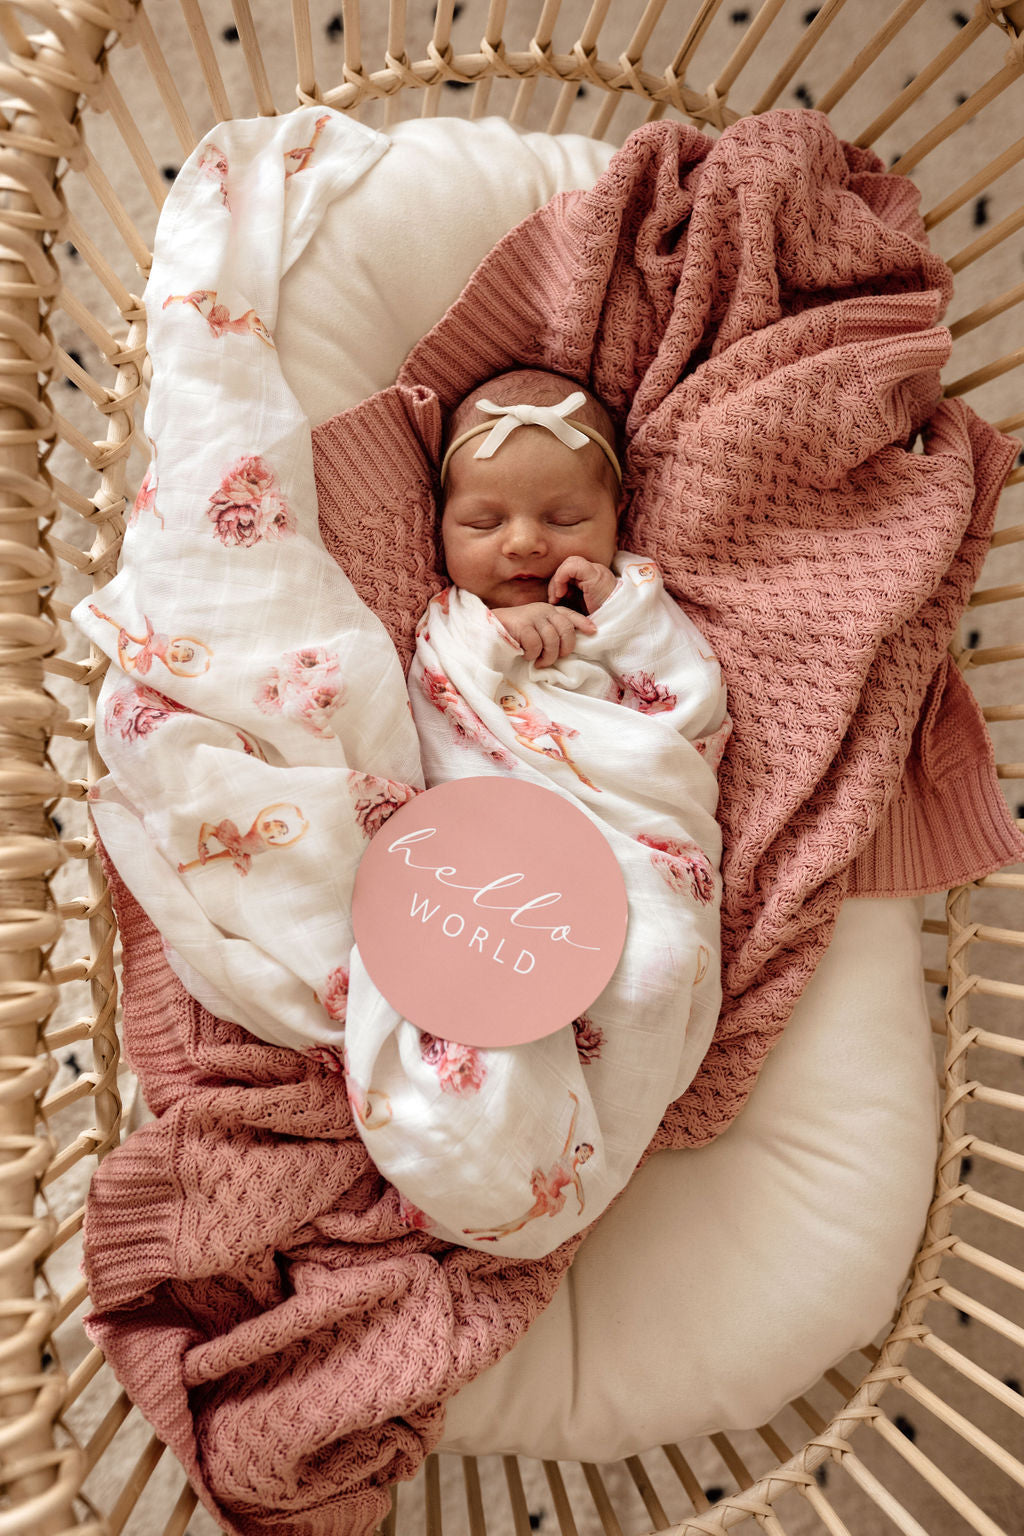 Rosa Diamond Knit Baby Blanket from Snuggle Hunny Kids is now available on Sugarbird Kids.